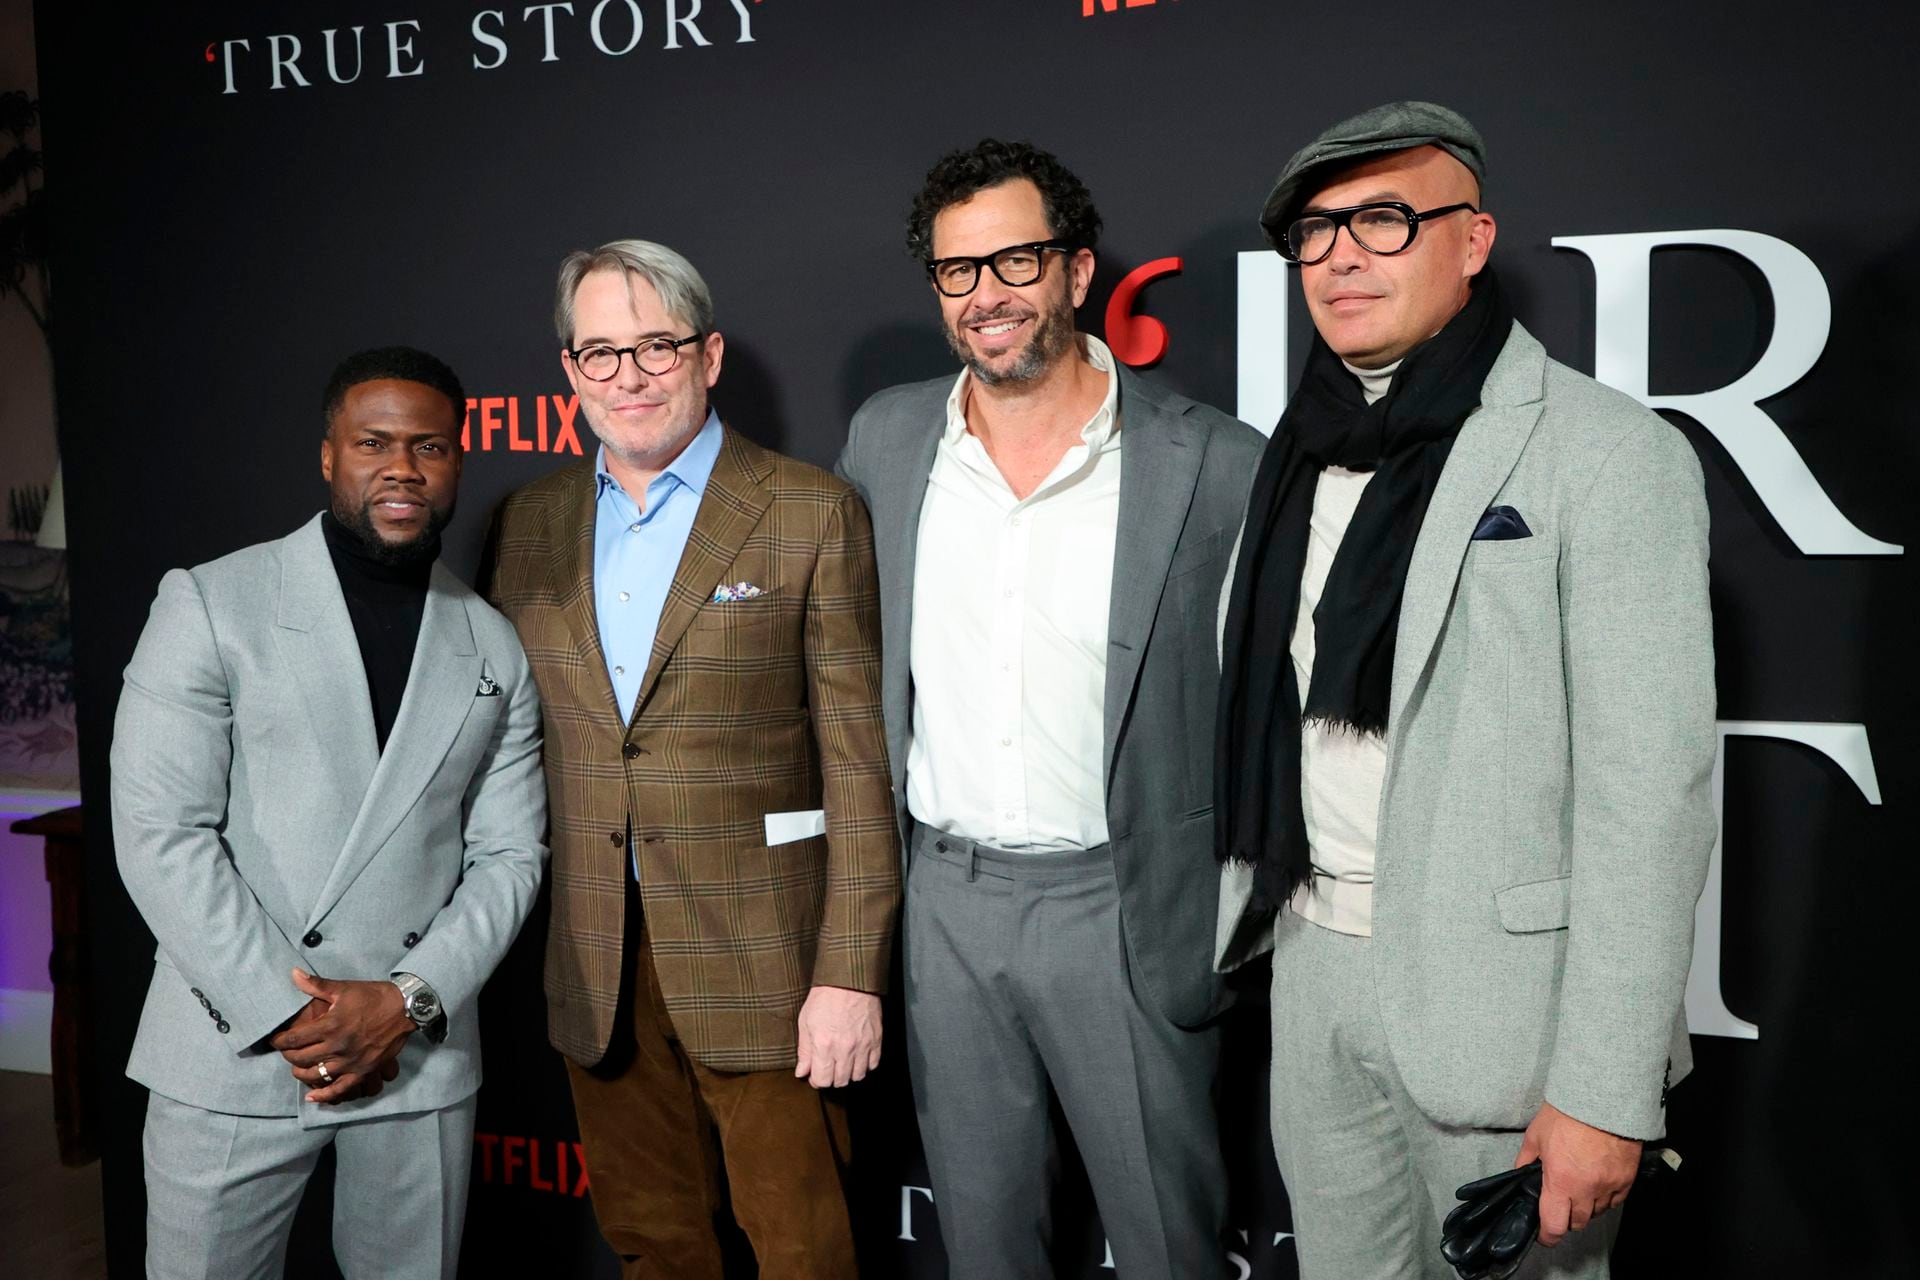 In New York, premiere. Actors Kevin Hart, Matthew Broderick and Billy Zane, along with director Eric Newman participated in the screening of the new Netflix series, True Story